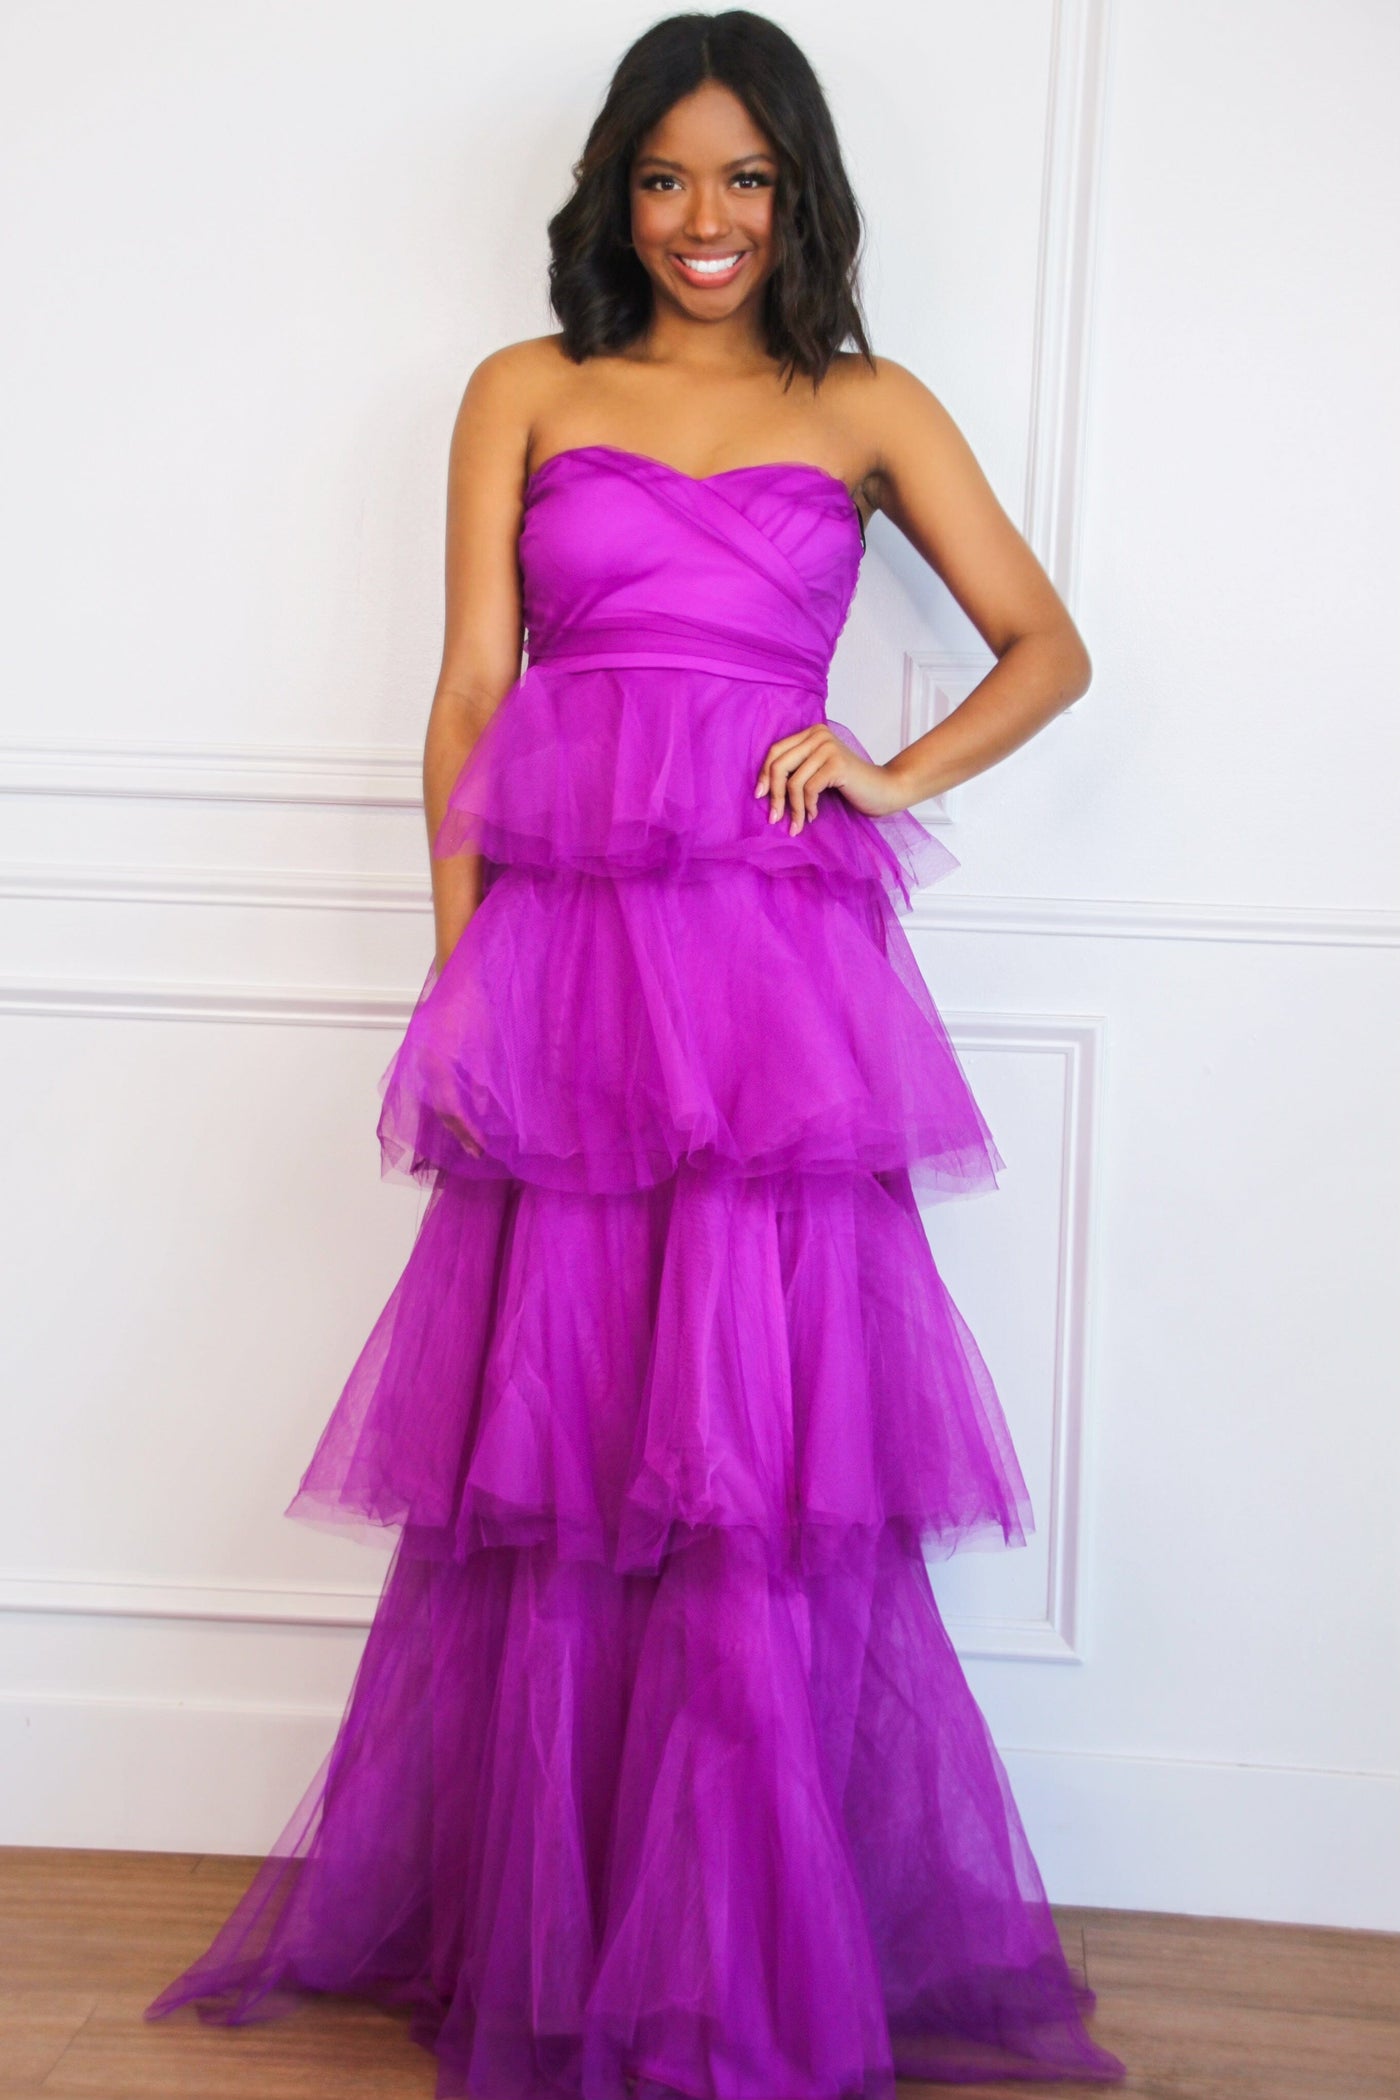 Fairytale State of Mind Tiered Tulle Maxi Dress: Electric Orchid - Bella and Bloom Boutique